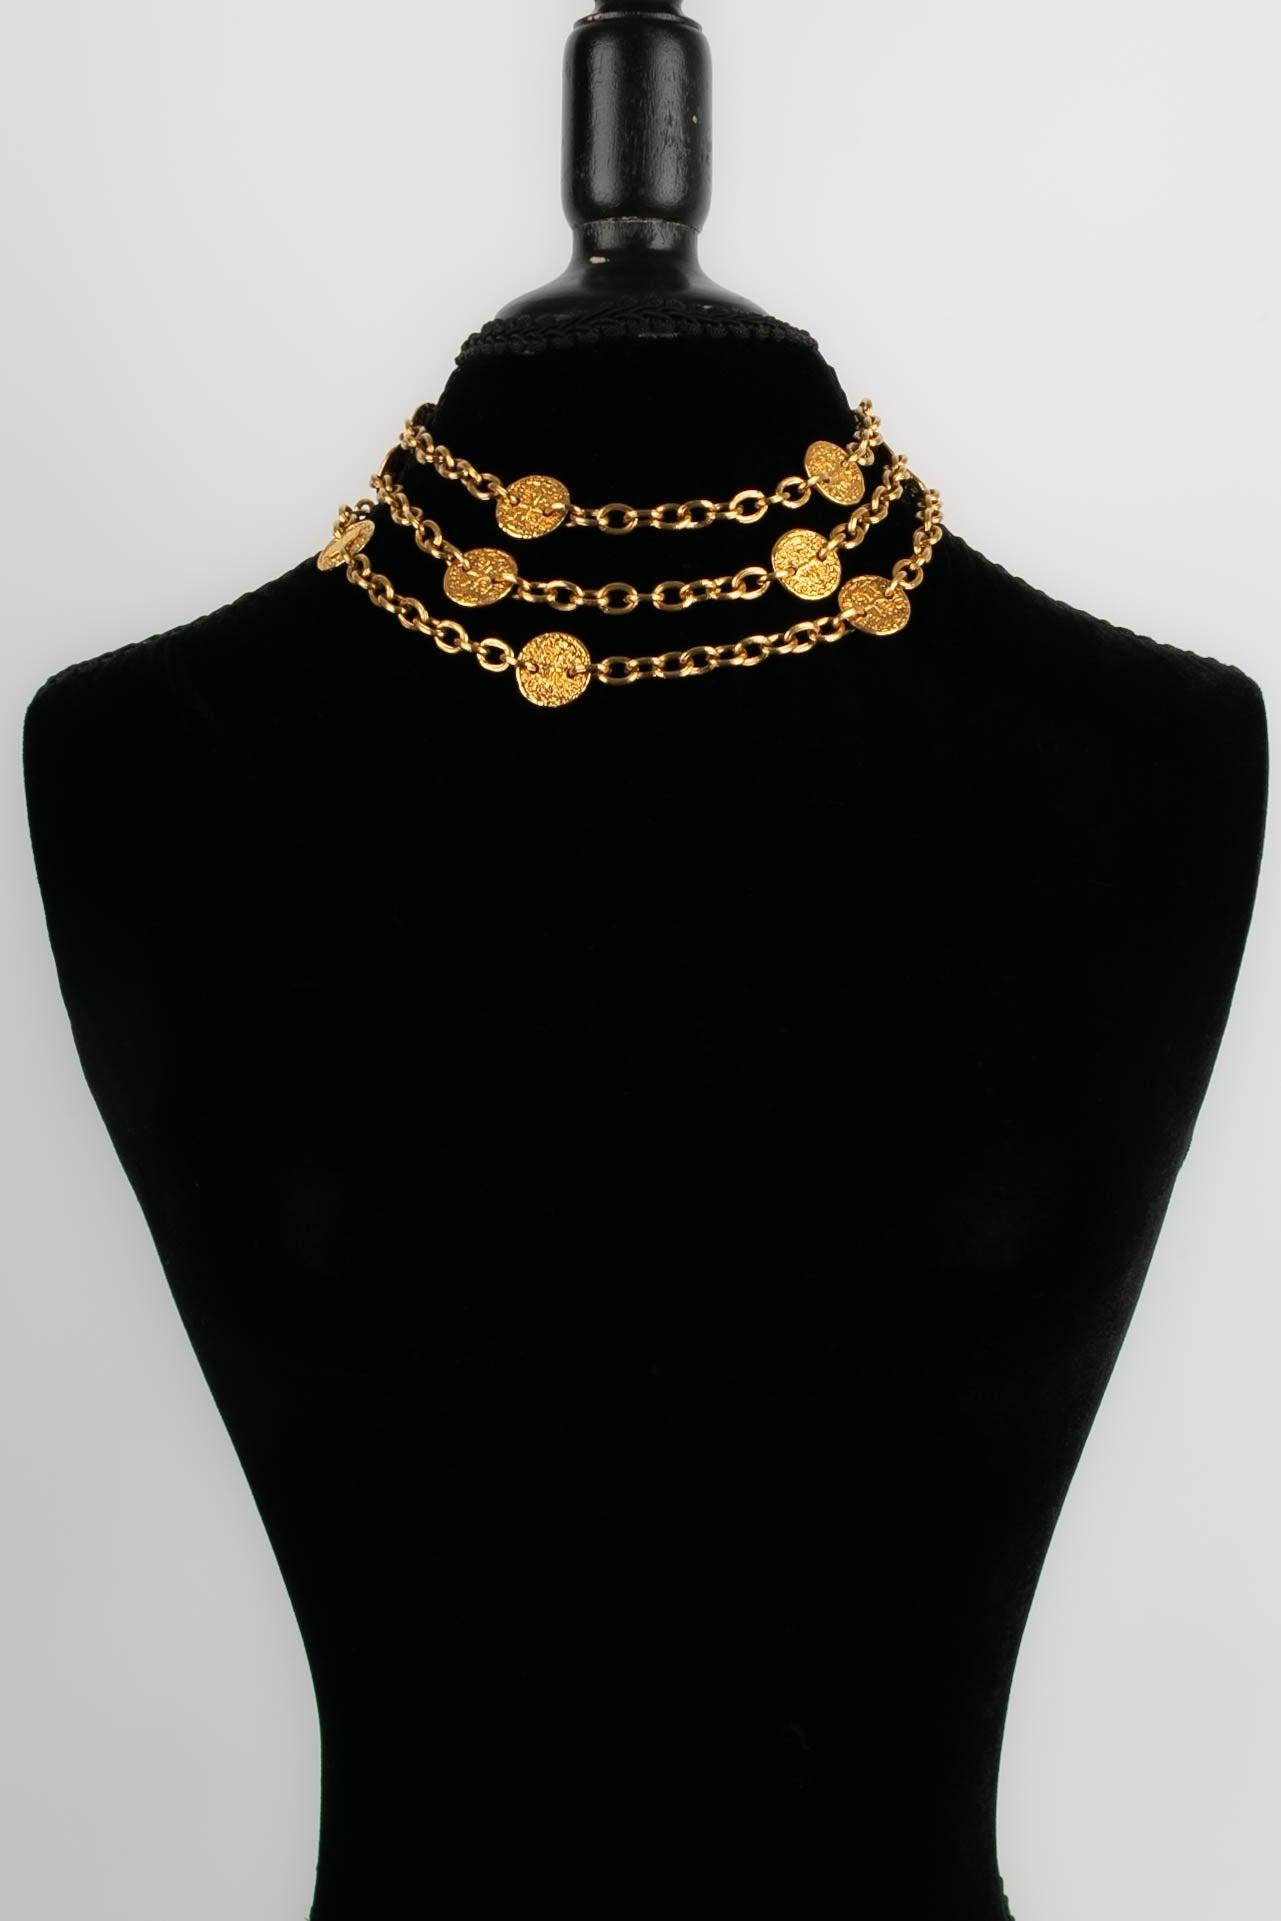 Chanel Necklace in Gold Metal Chain and Medals In Excellent Condition For Sale In SAINT-OUEN-SUR-SEINE, FR